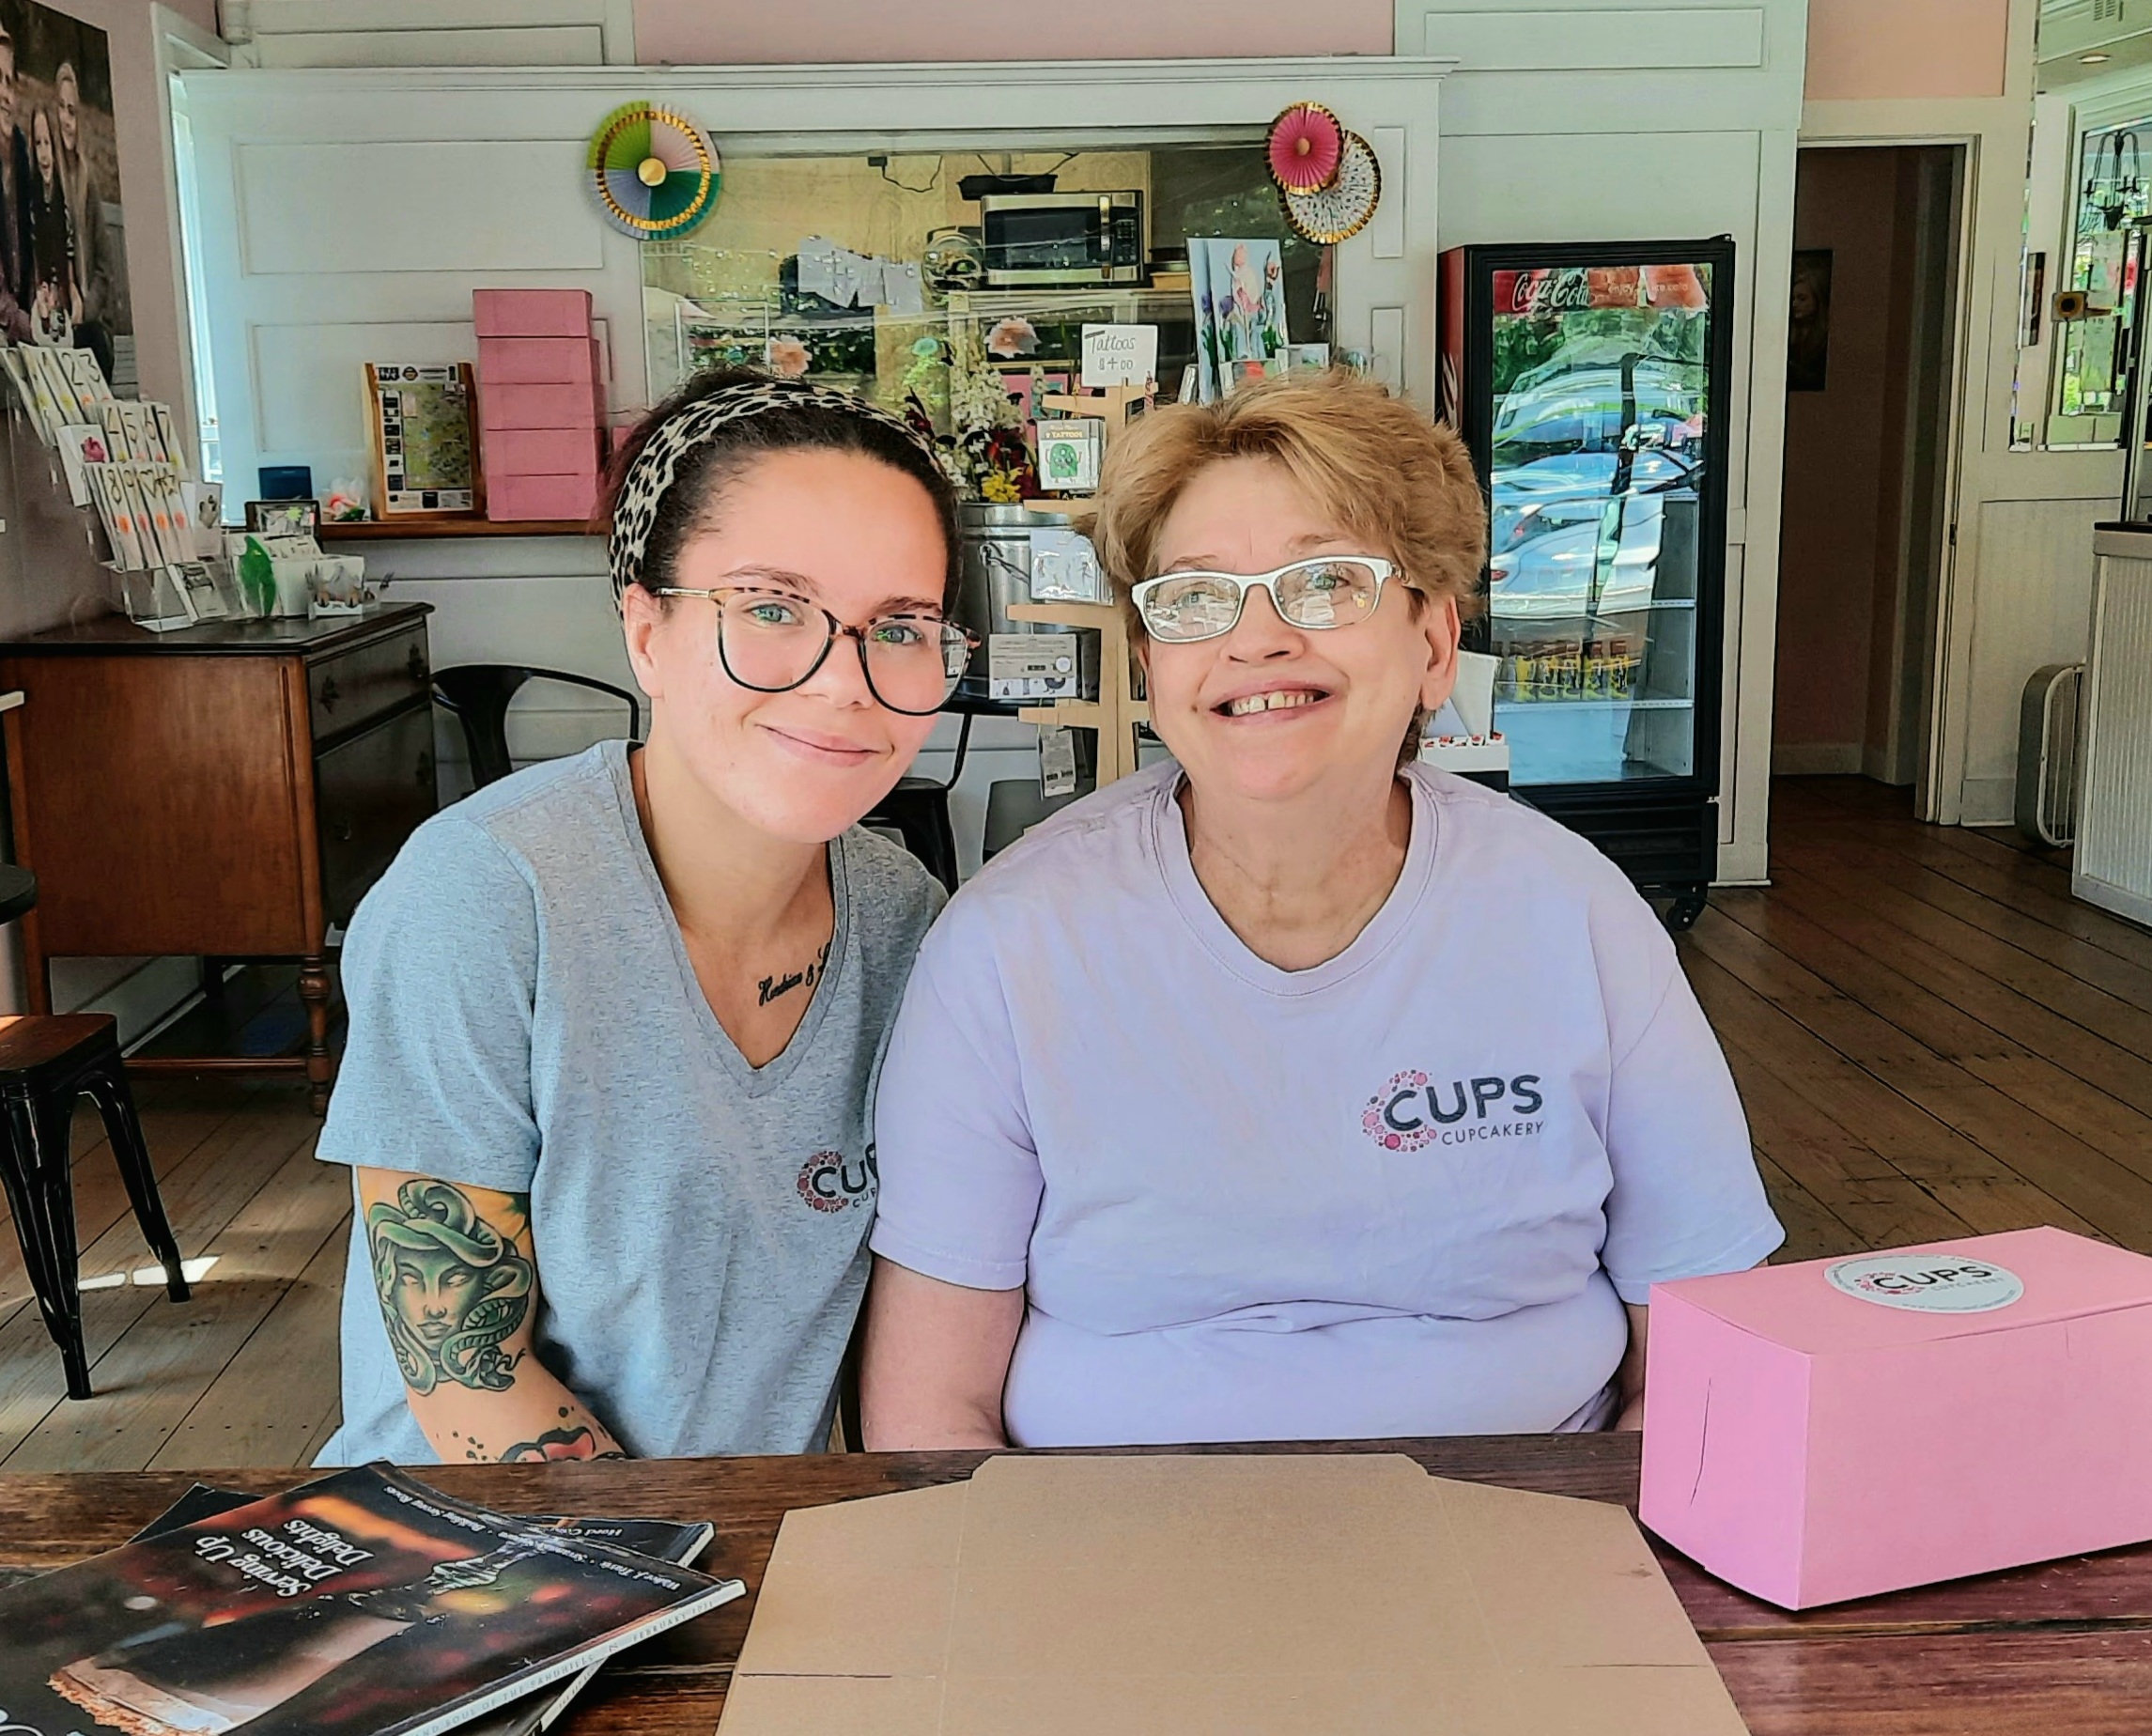 Linda Tyndall (right) sits with her colleague Kayla Burton (left) at C. Cups Cupcakery in Pinehurst.   